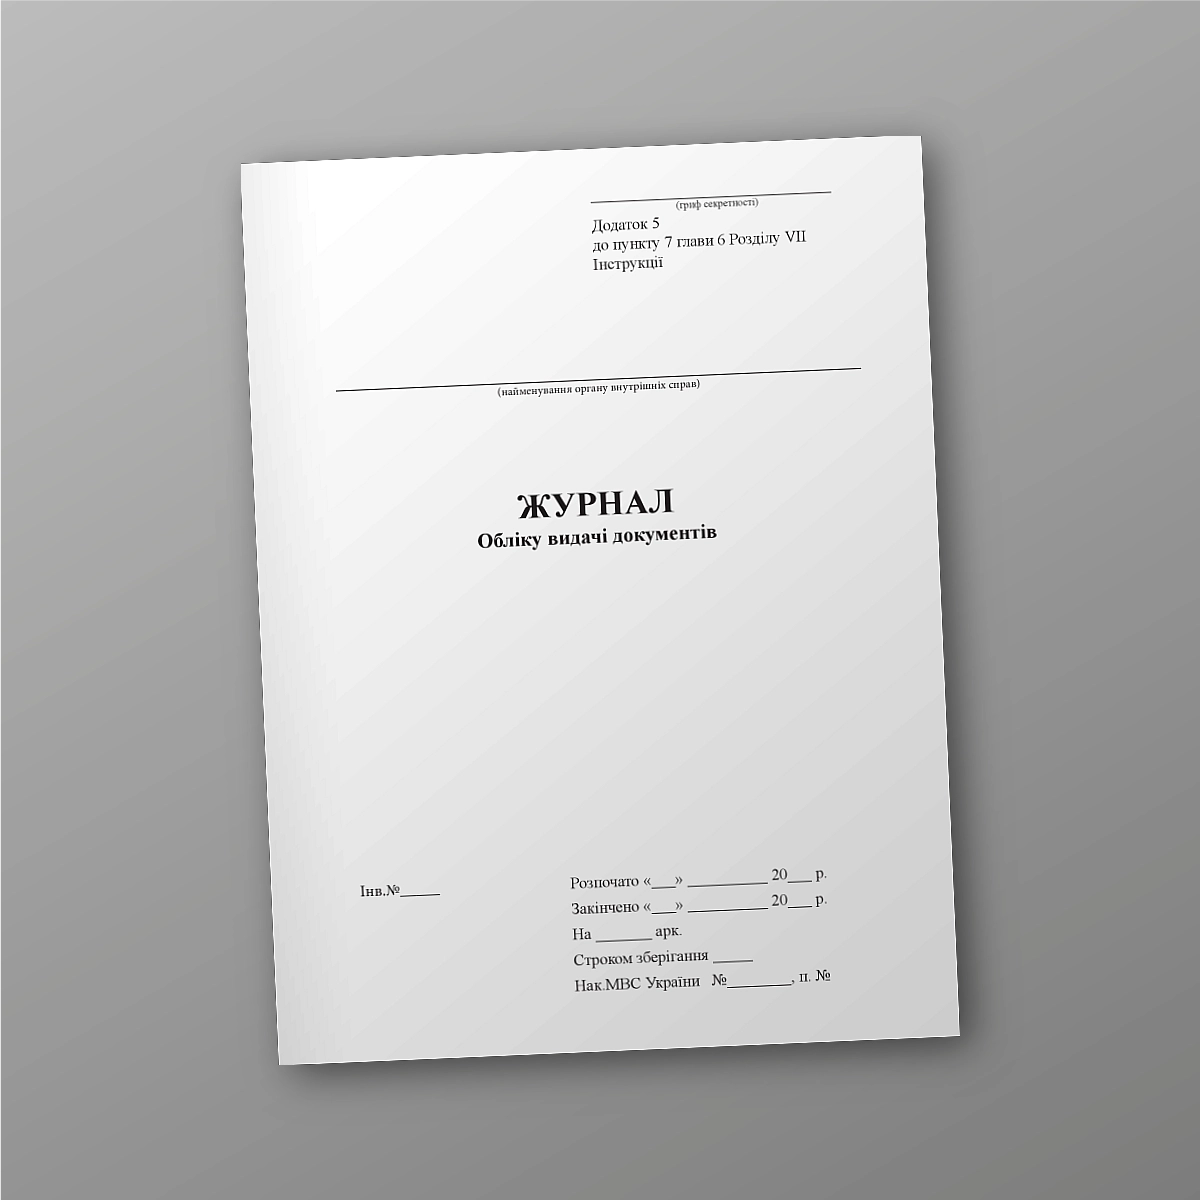 Journal of accounting for issuance of documents | PrintTo: